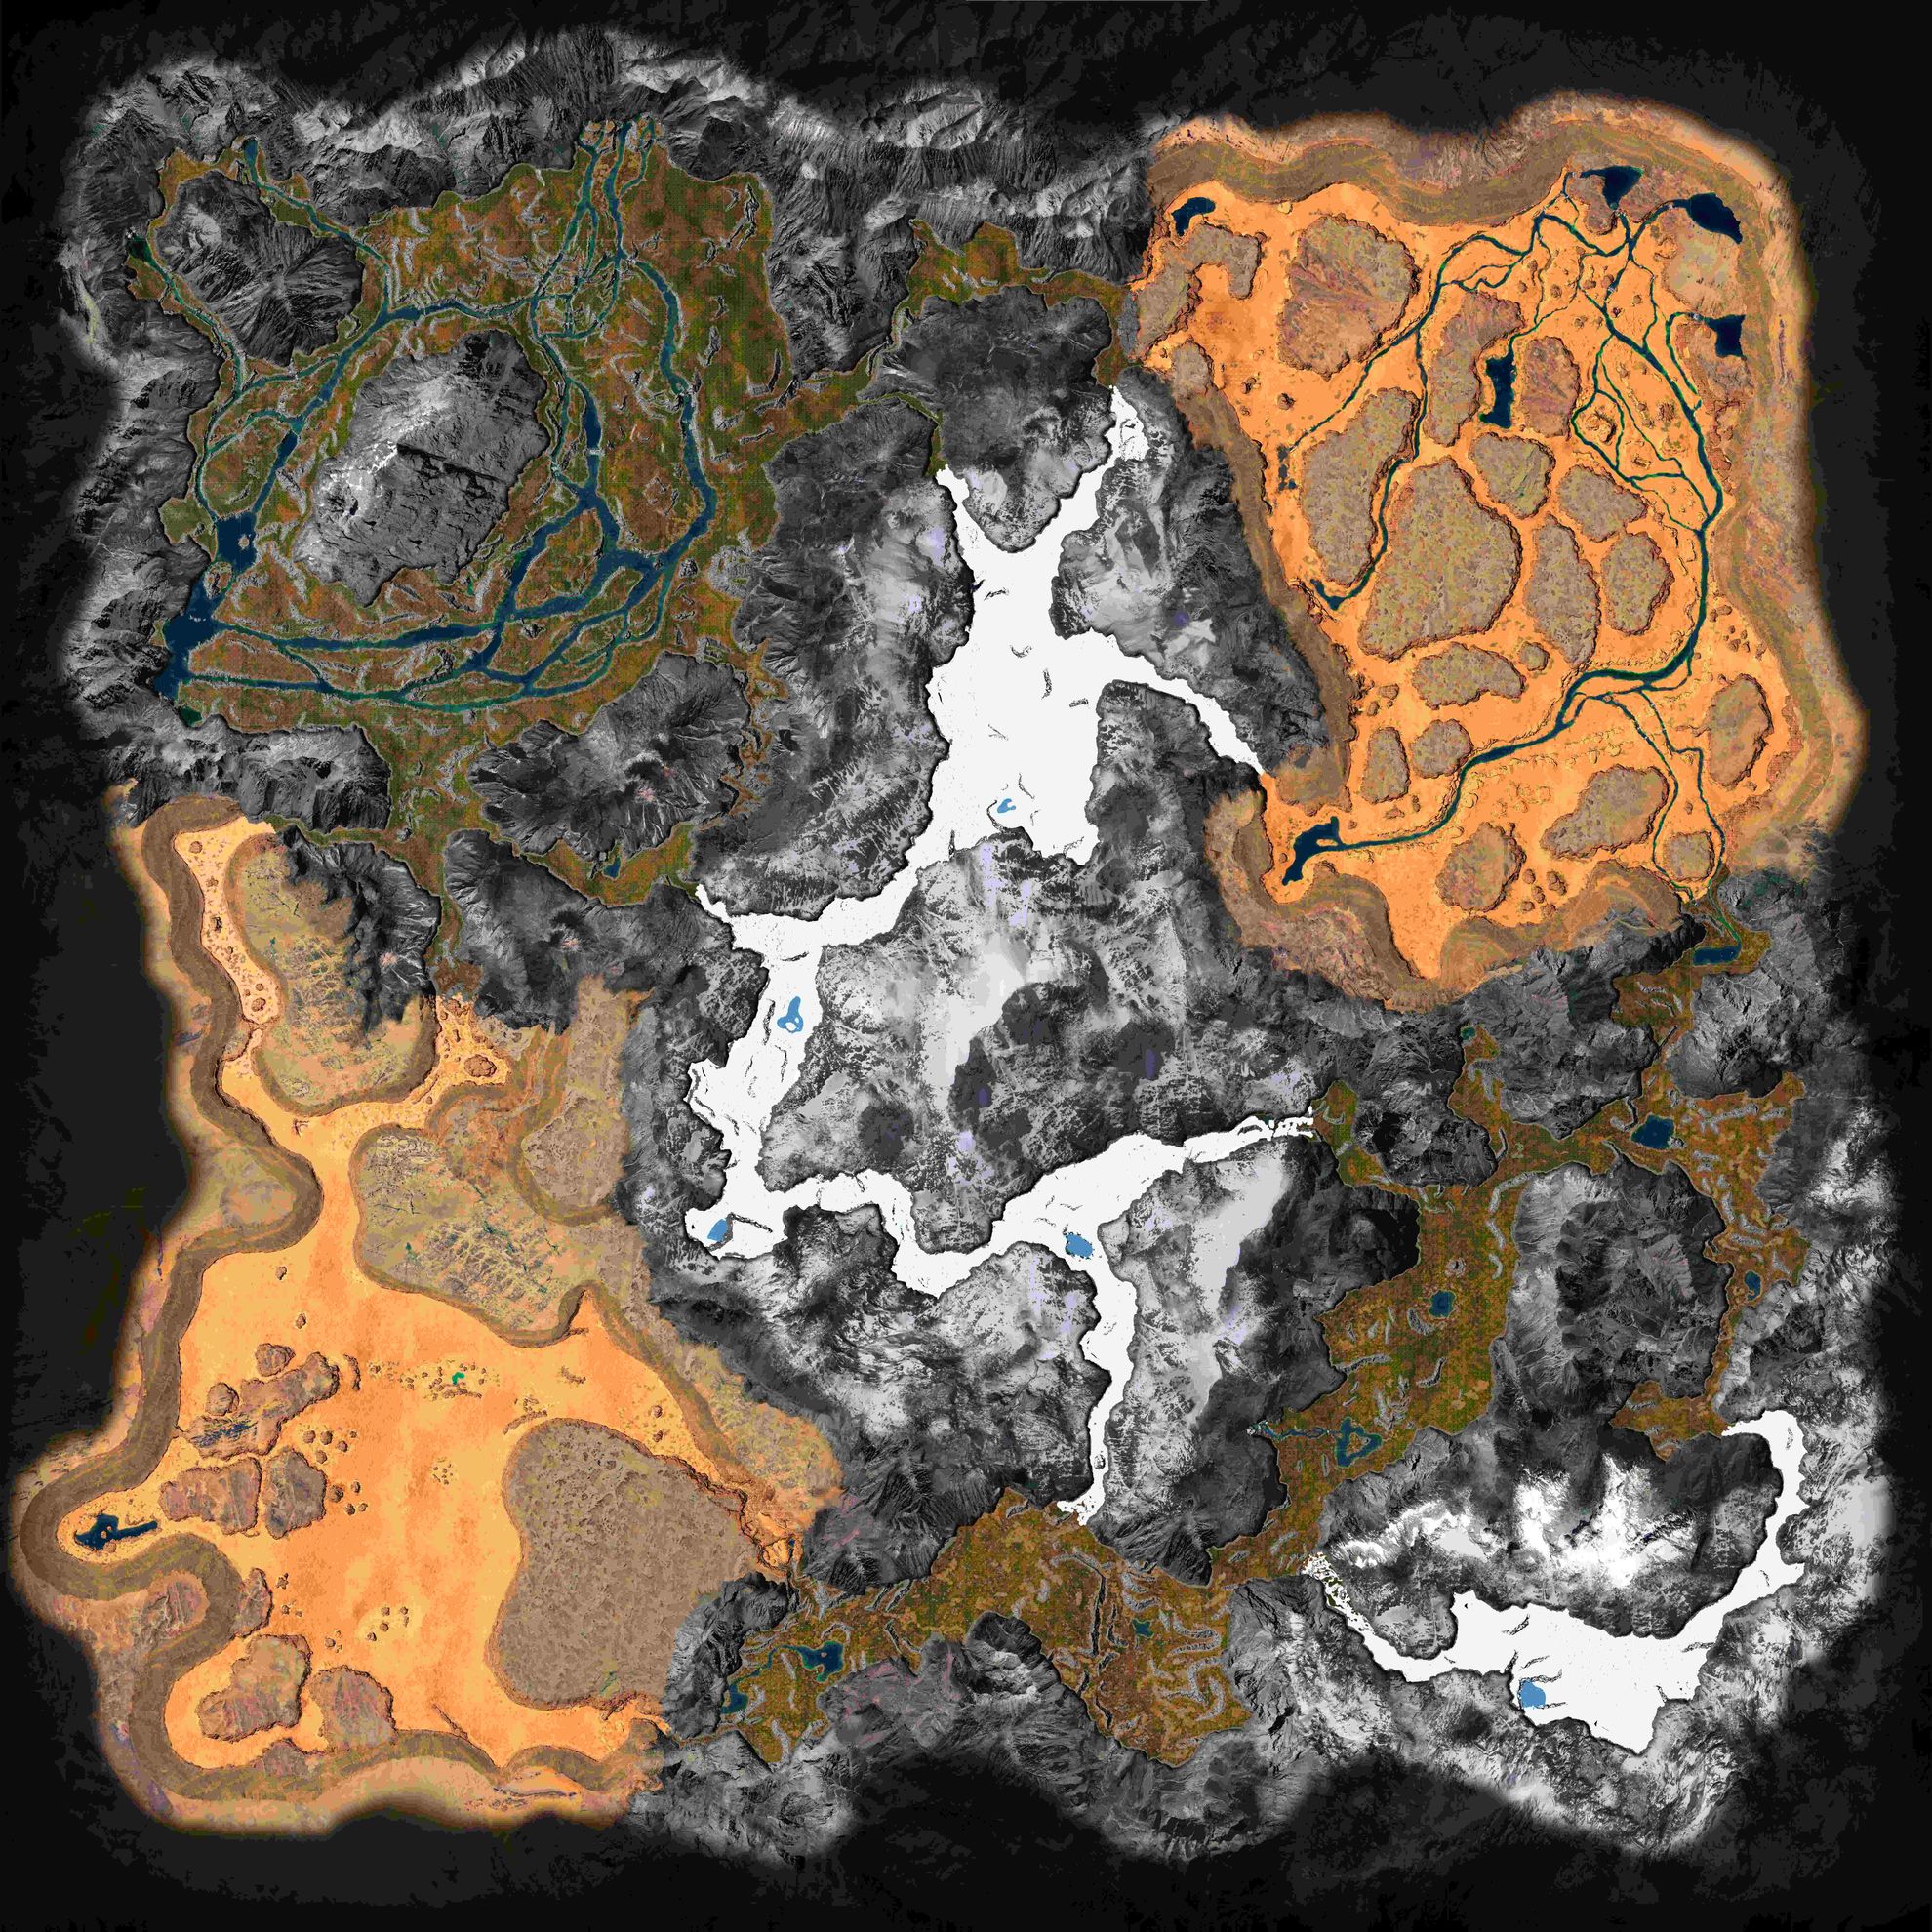 Icarus styx cave map